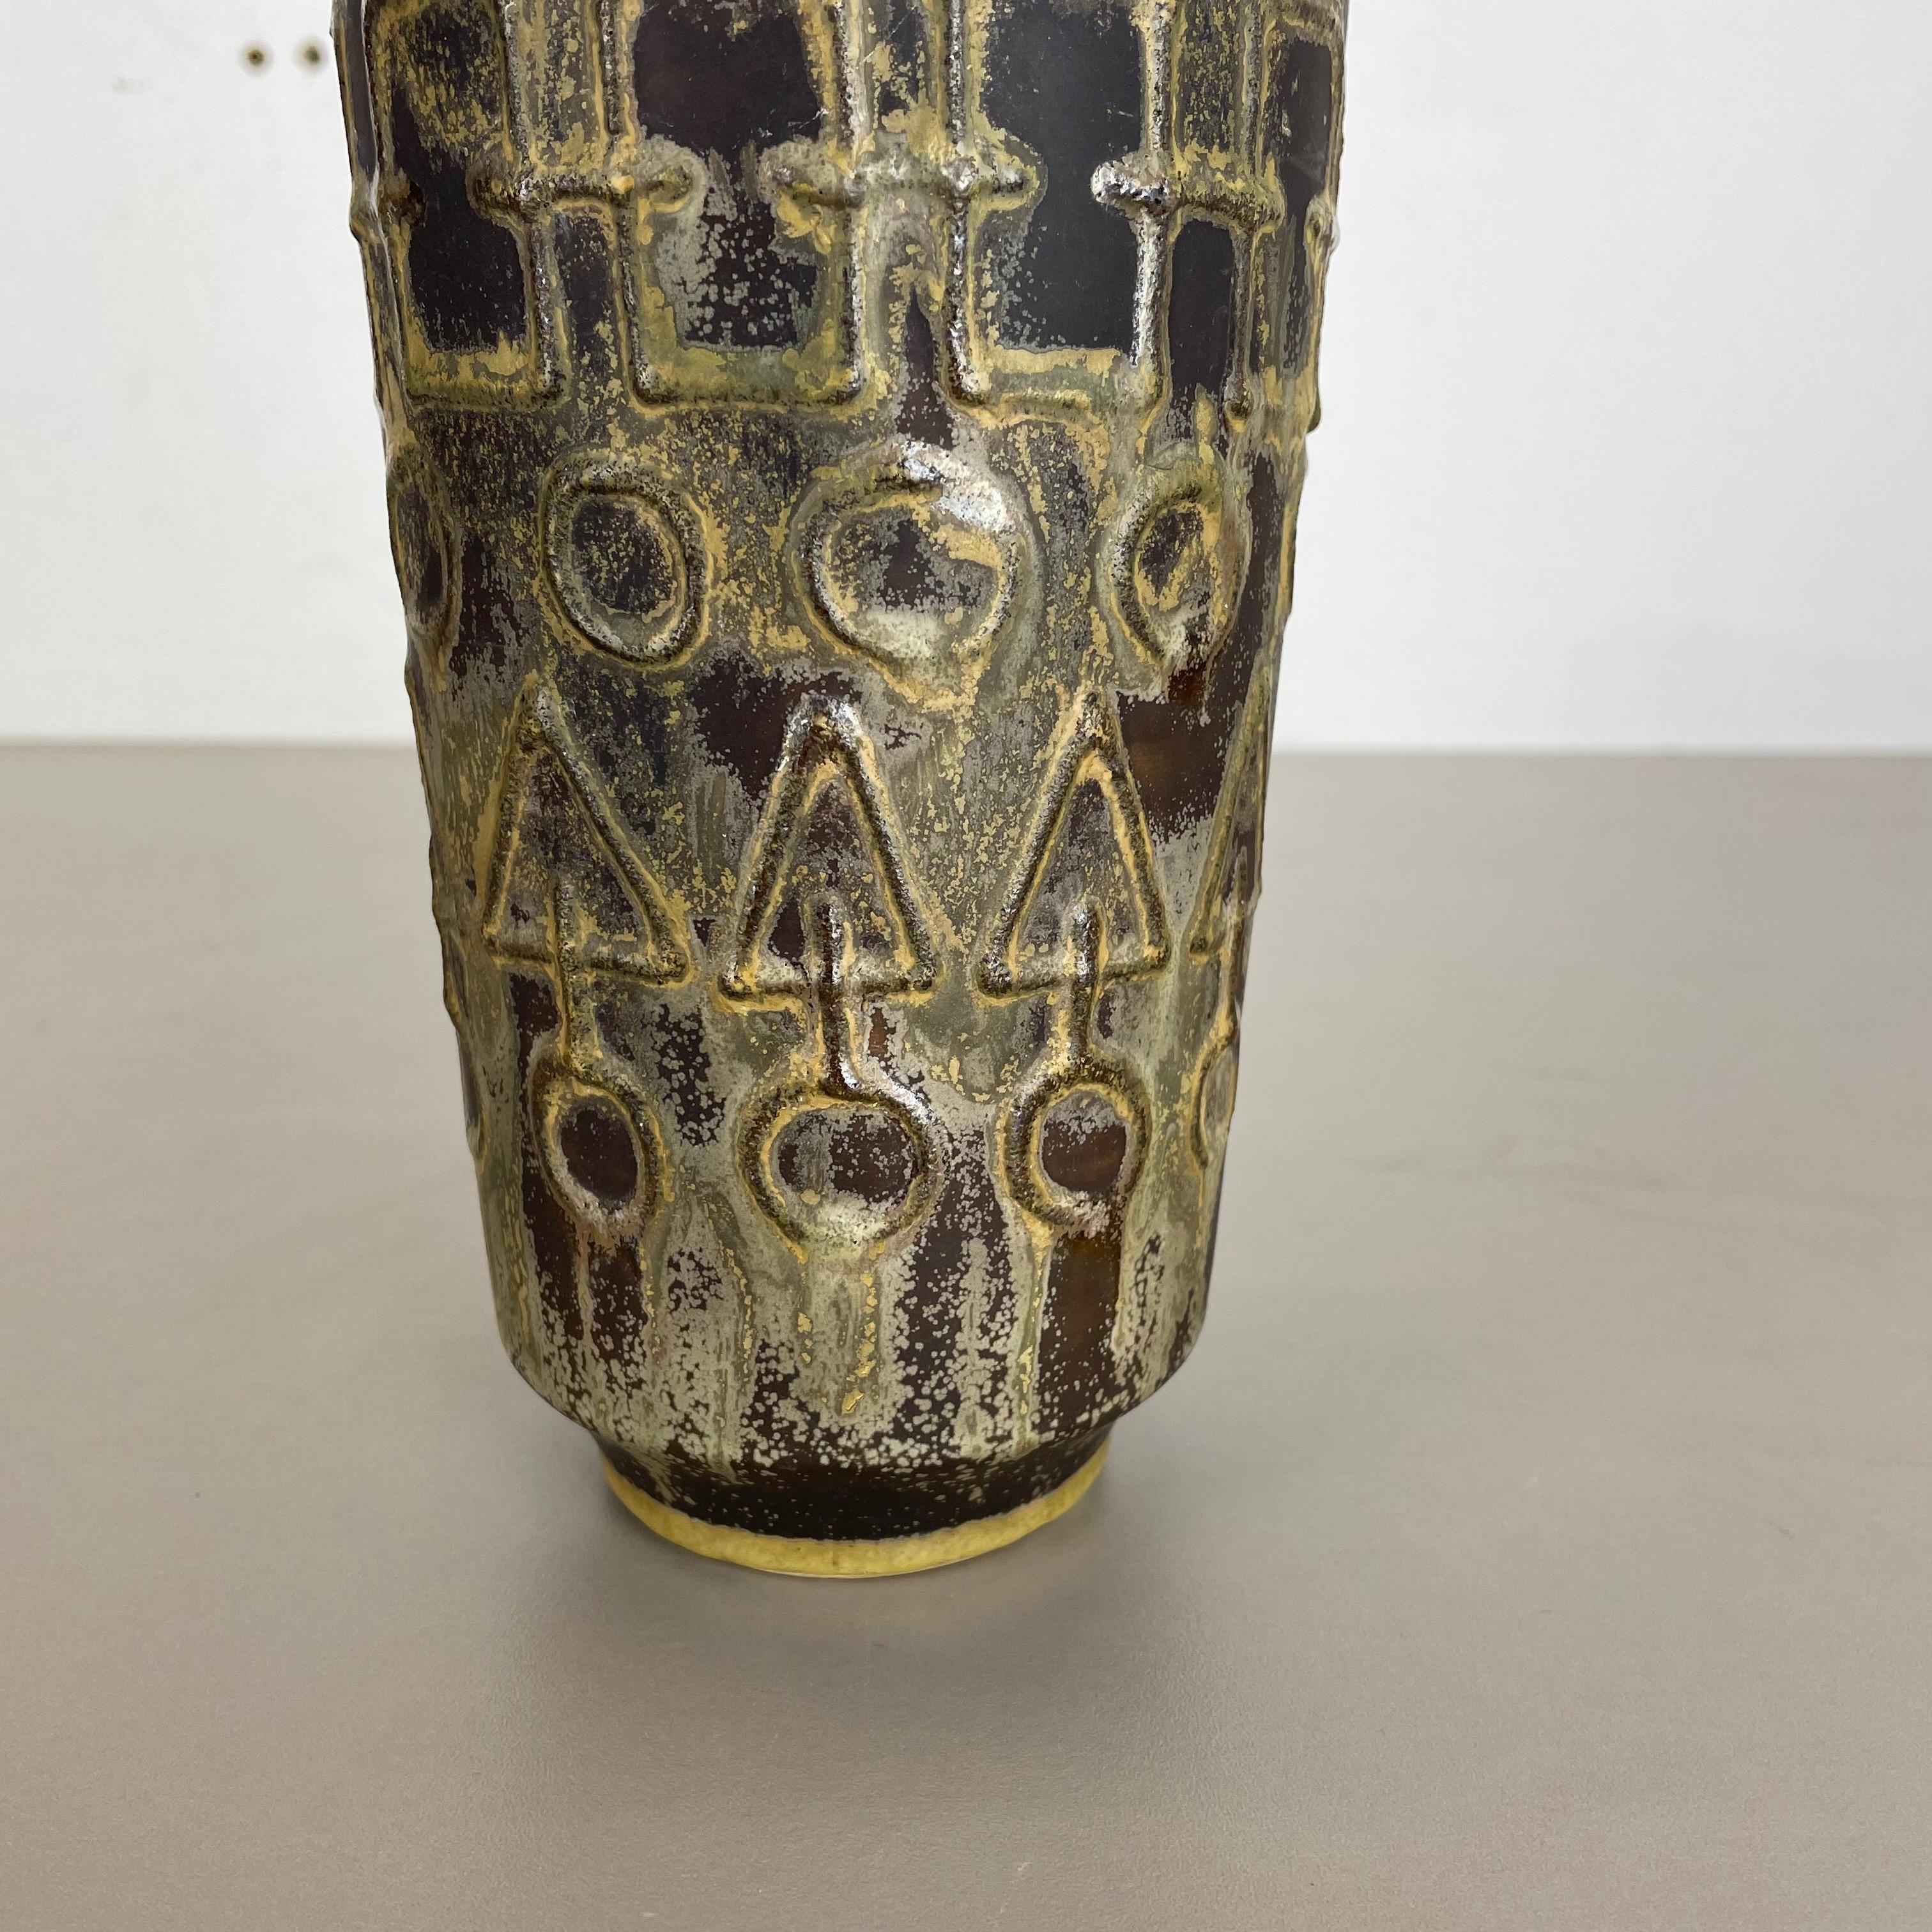 Vintage Abstract Ceramic Pottery Vase by Simon Peter Gerz, Germany, 1960s For Sale 1